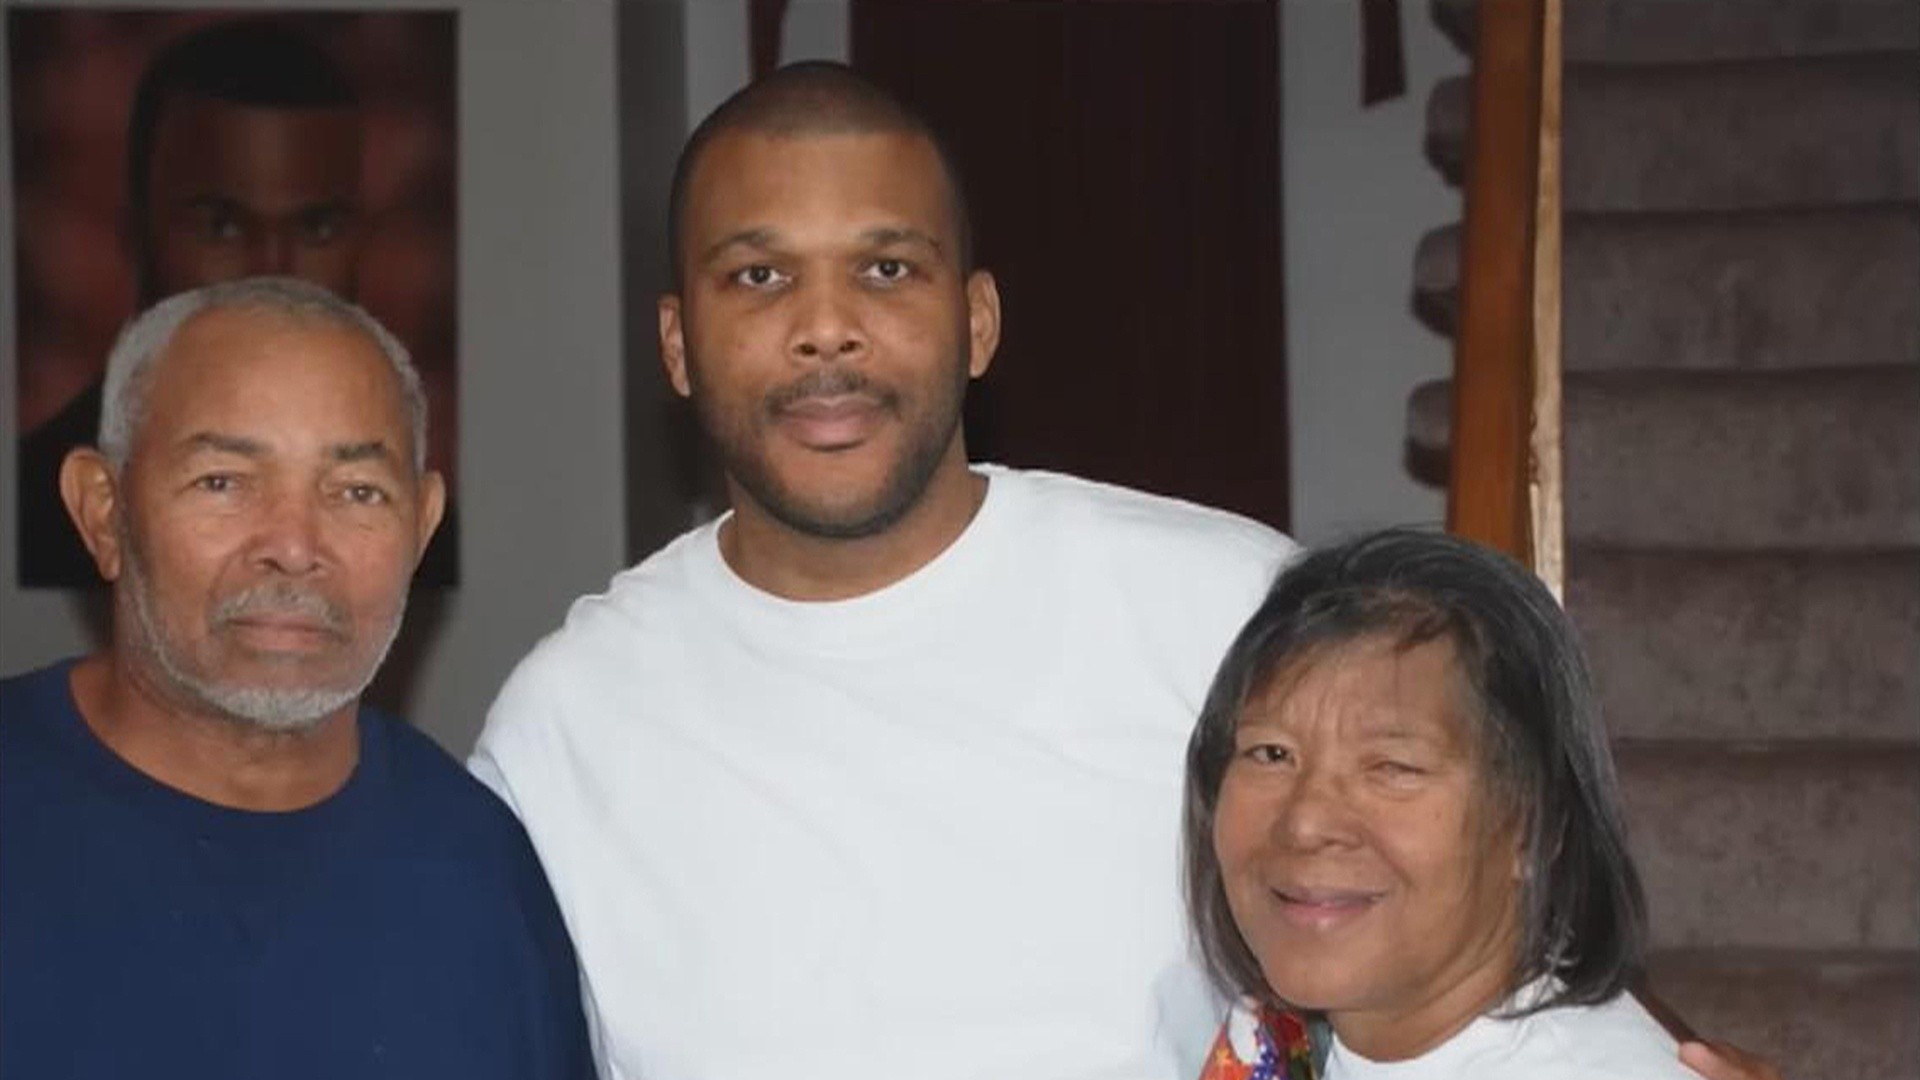 Tyler Perry shares life story in new documentary 'Maxine's Baby'